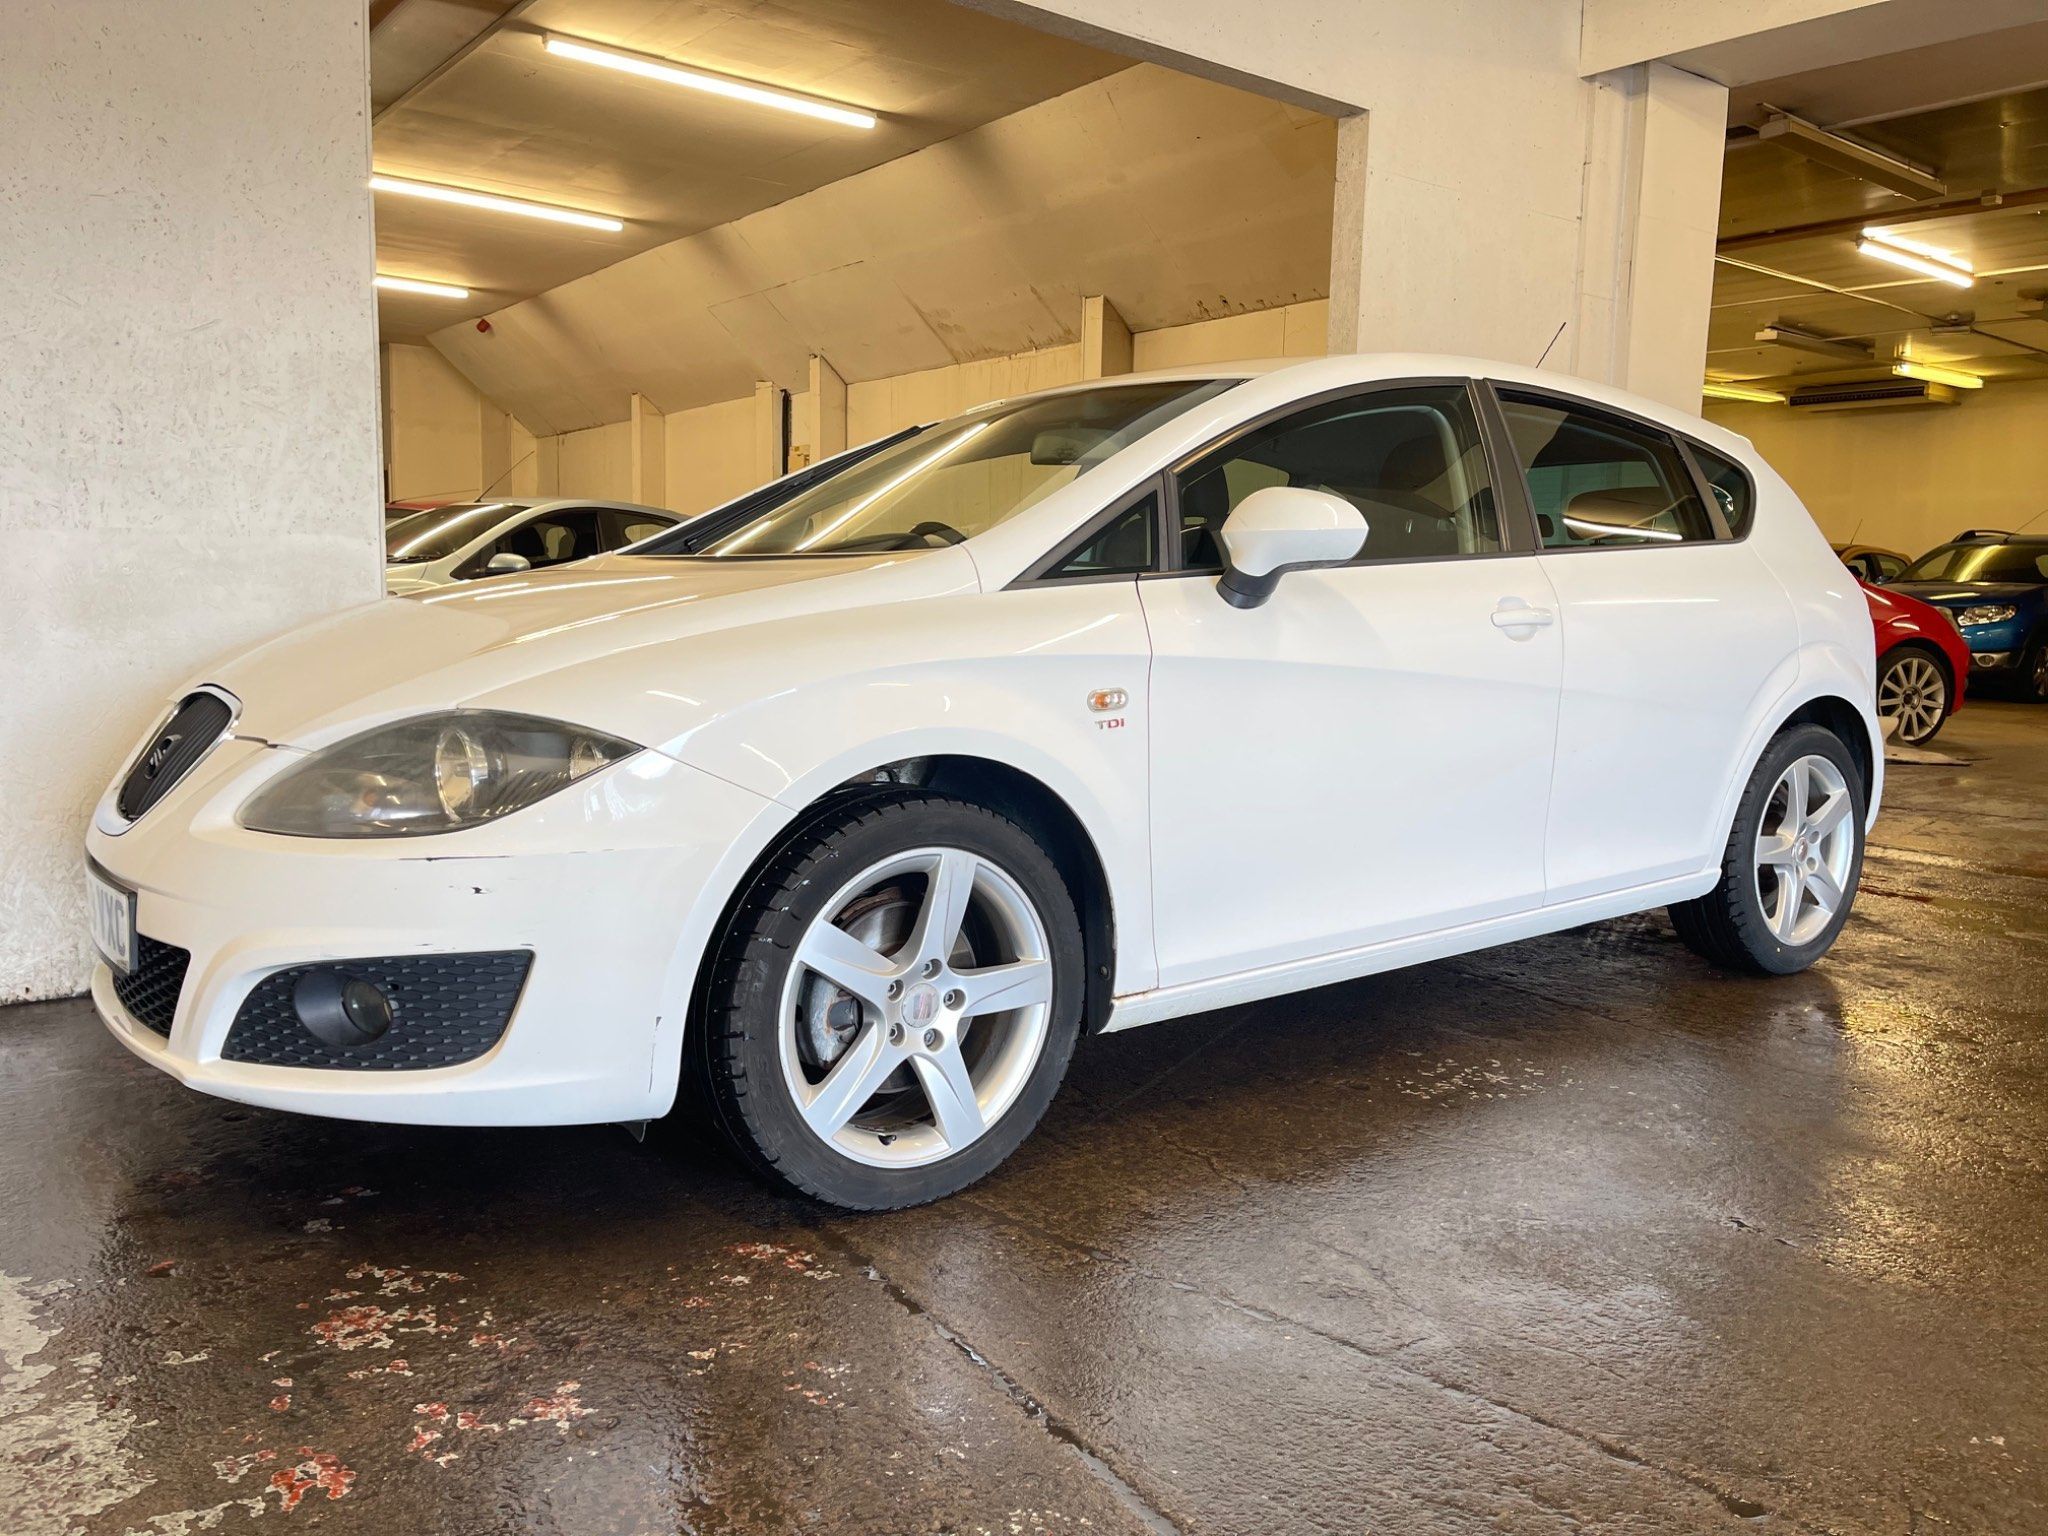 Used SEAT Leon review